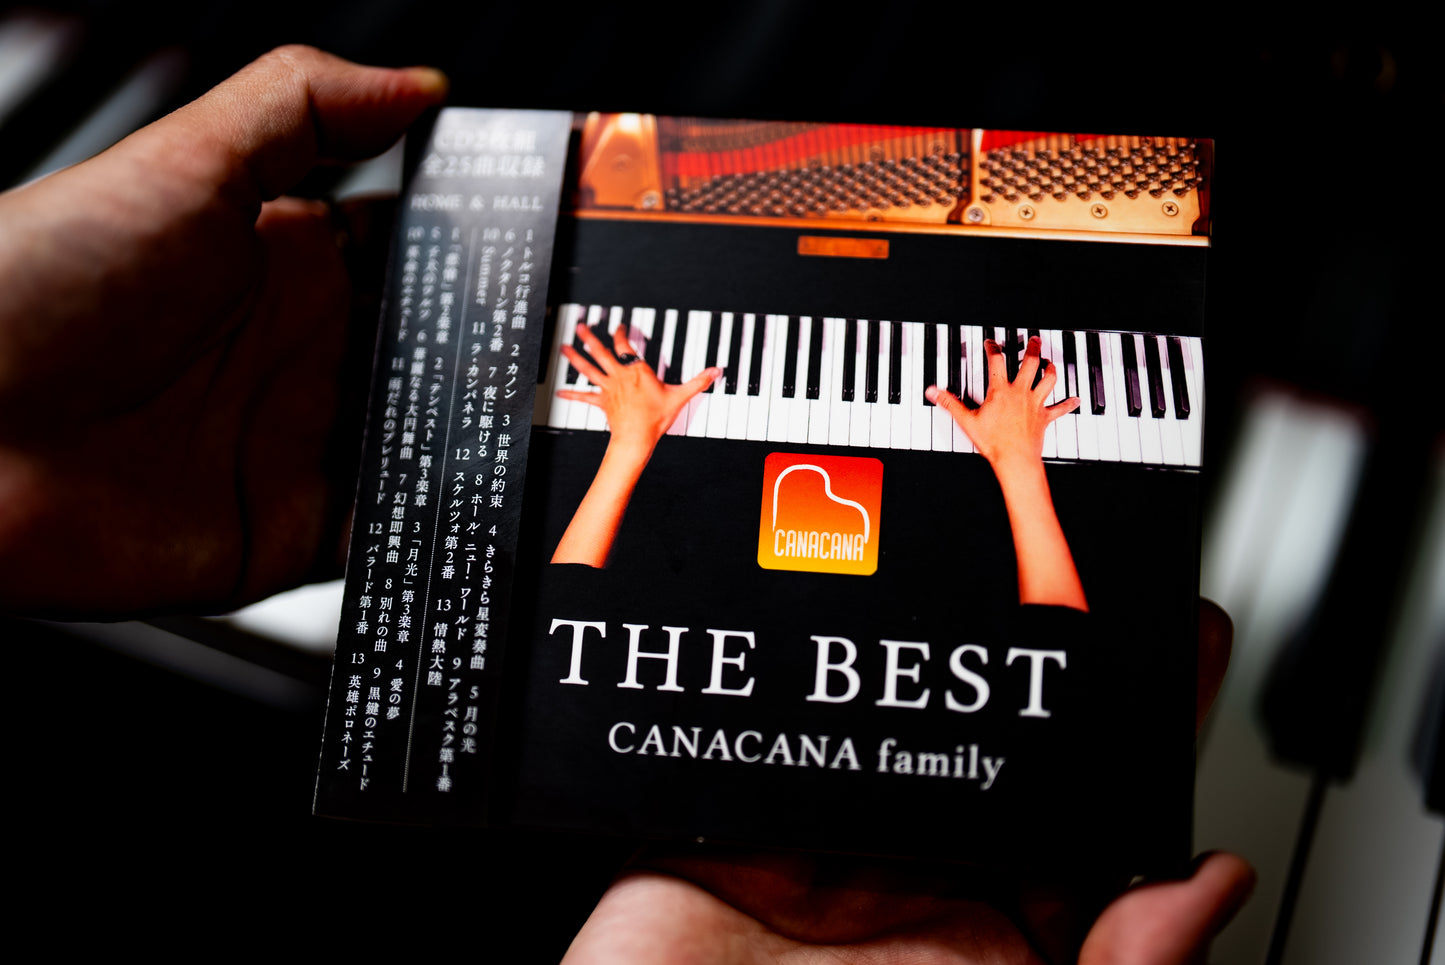 [CD] アルバム2枚組 CANACANA family THE BEST HOME & HALL